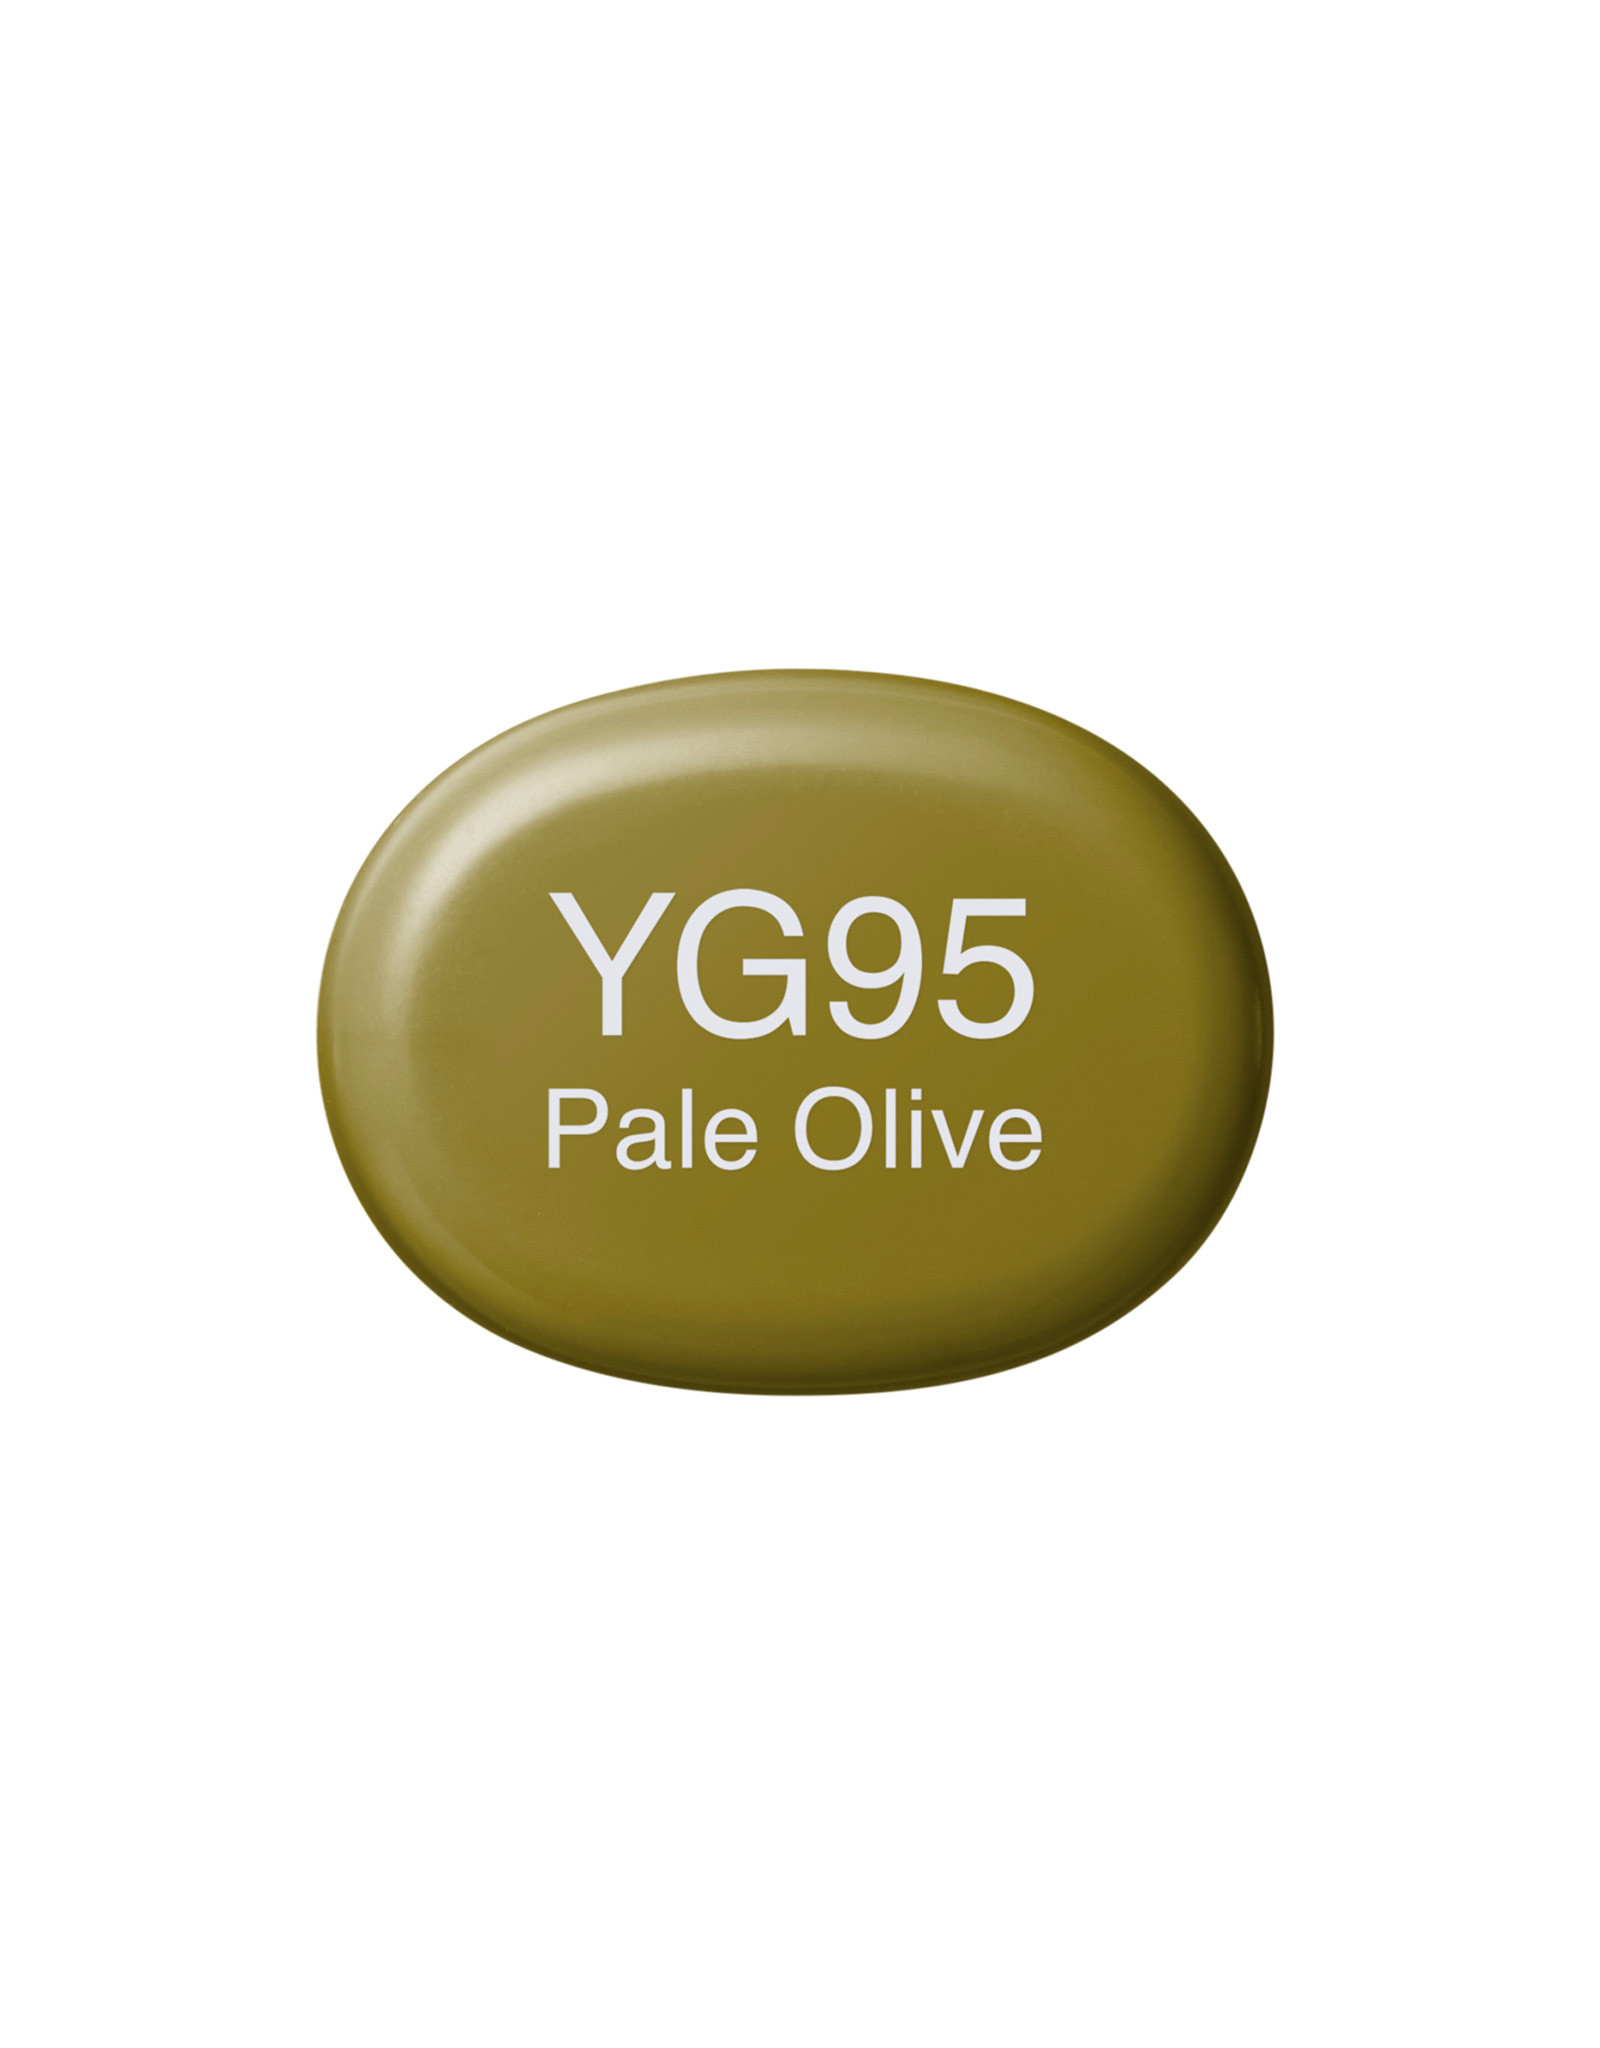 COPIC COPIC Sketch Marker YG95 Pale Olive